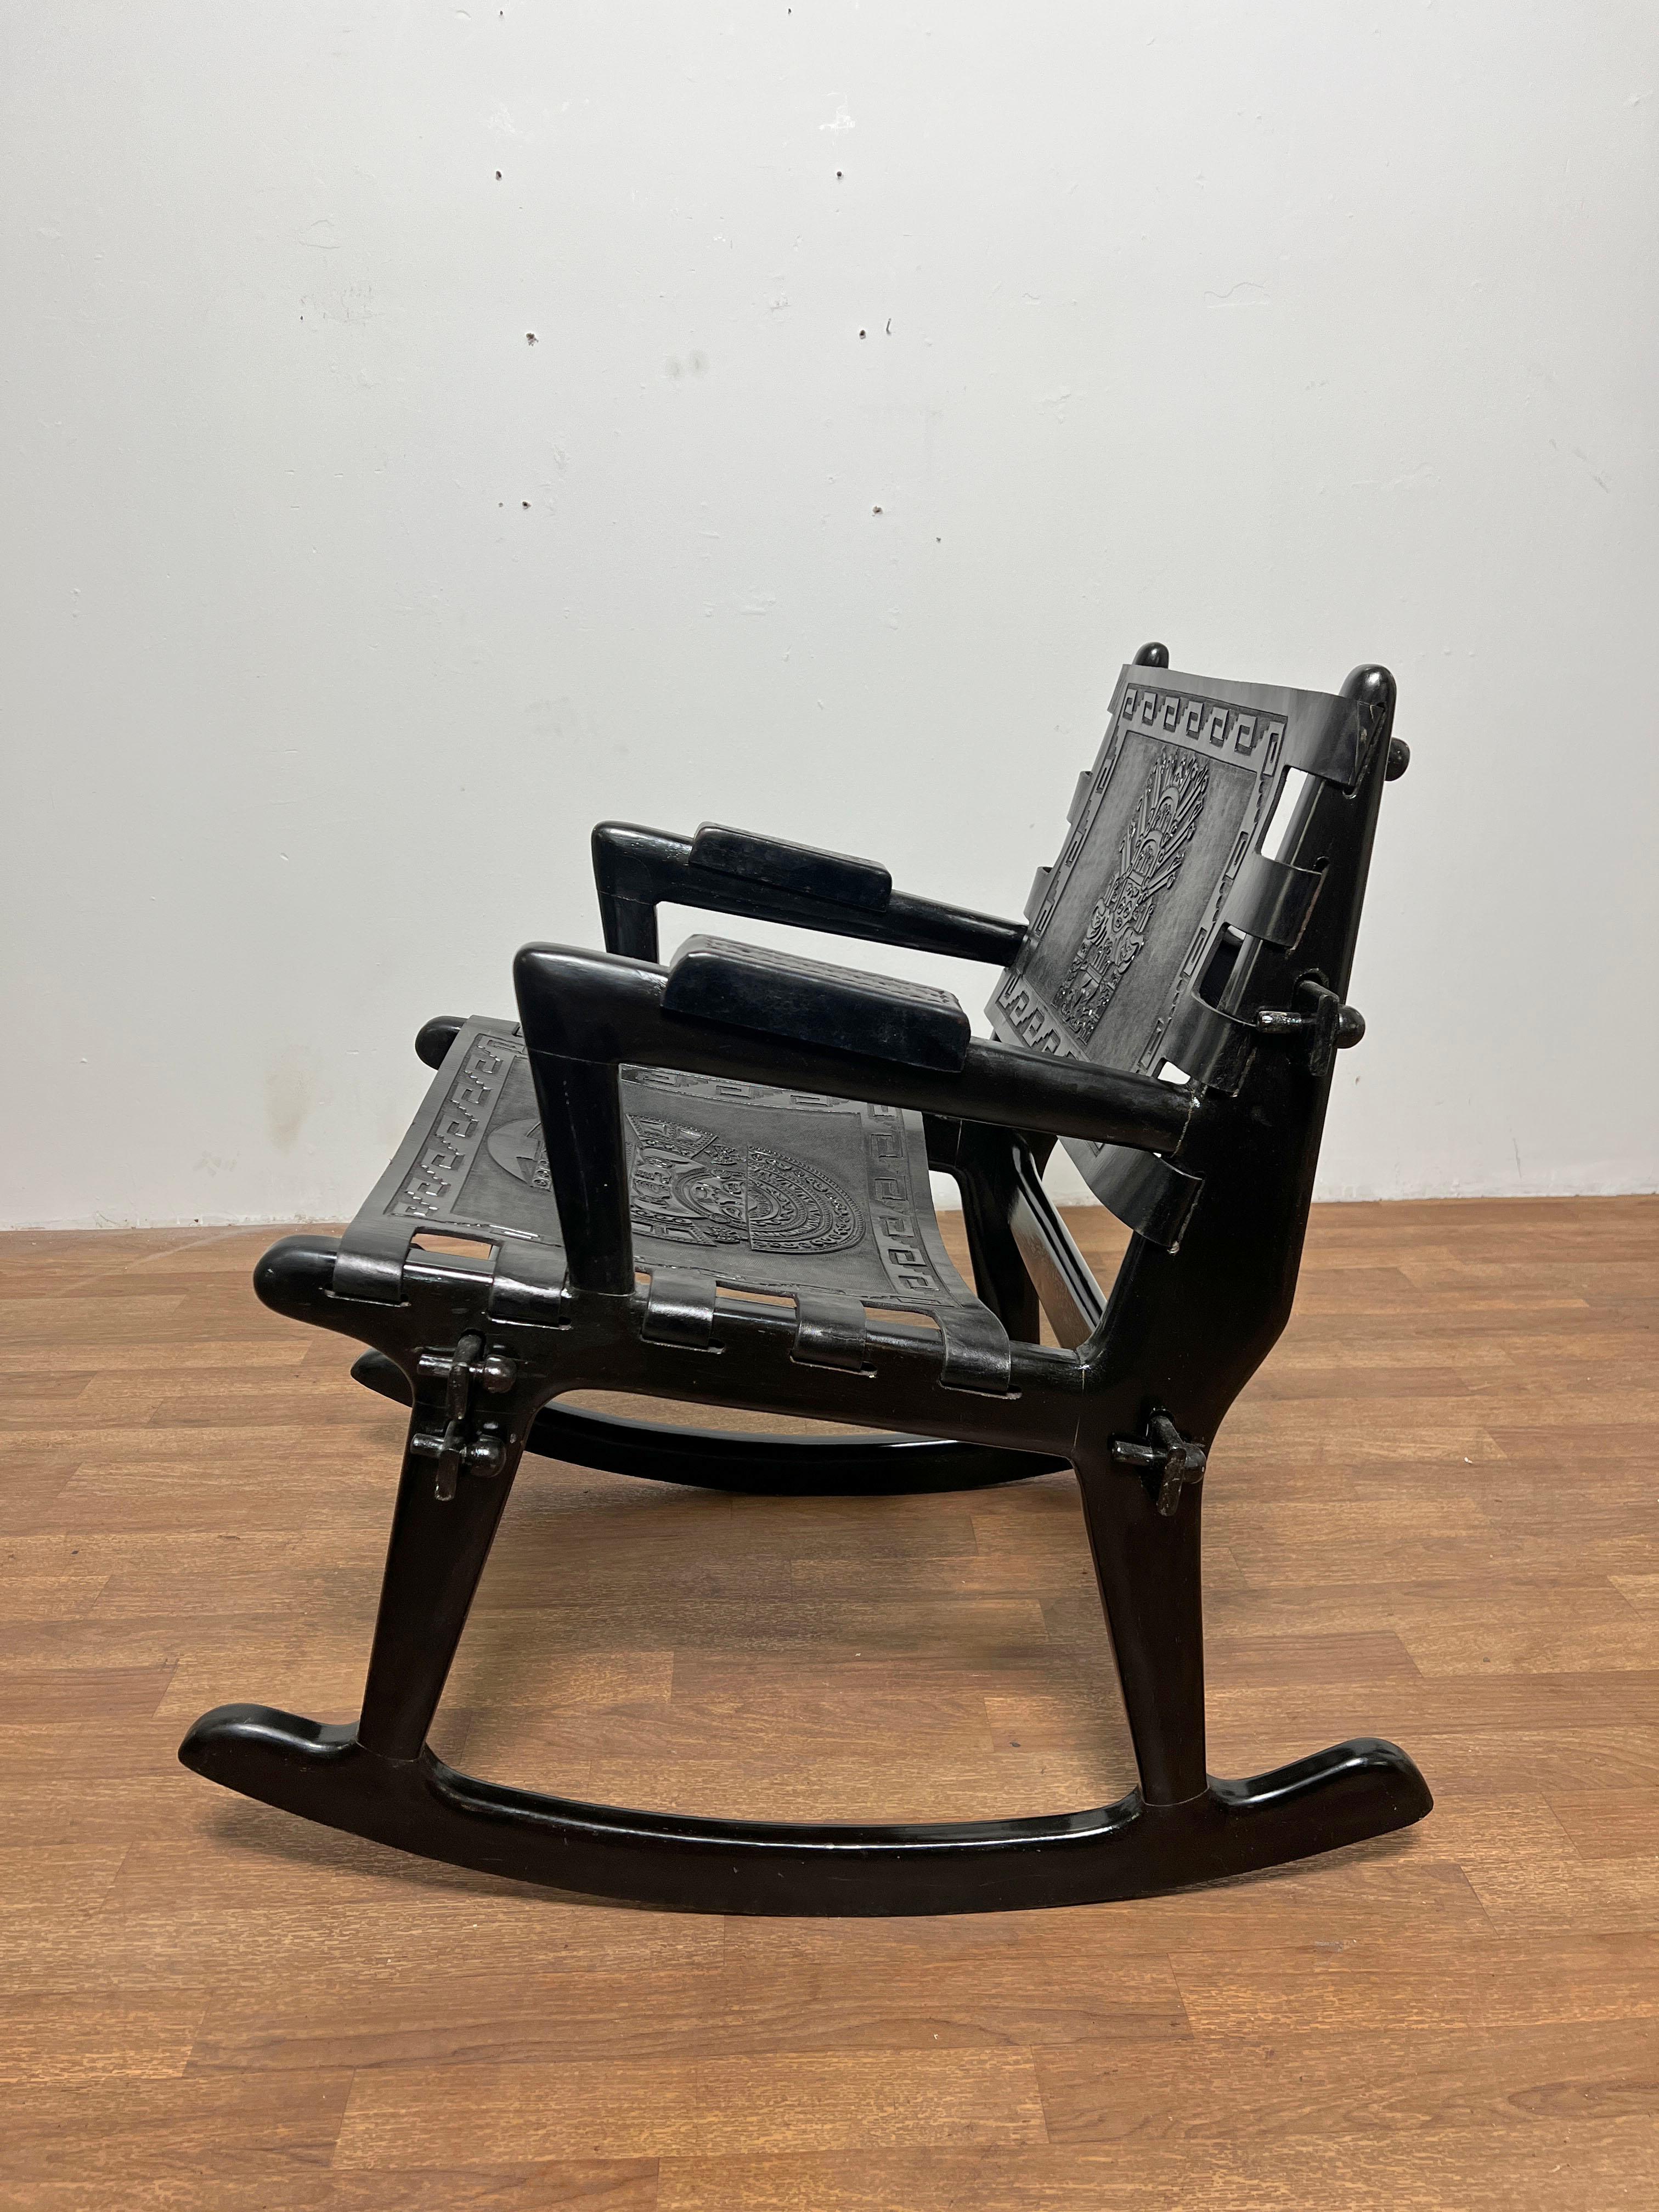 Modernist rocking chair inn leather and carved wood by Angel Pazmino, Ecuador, circa 1960s. 

